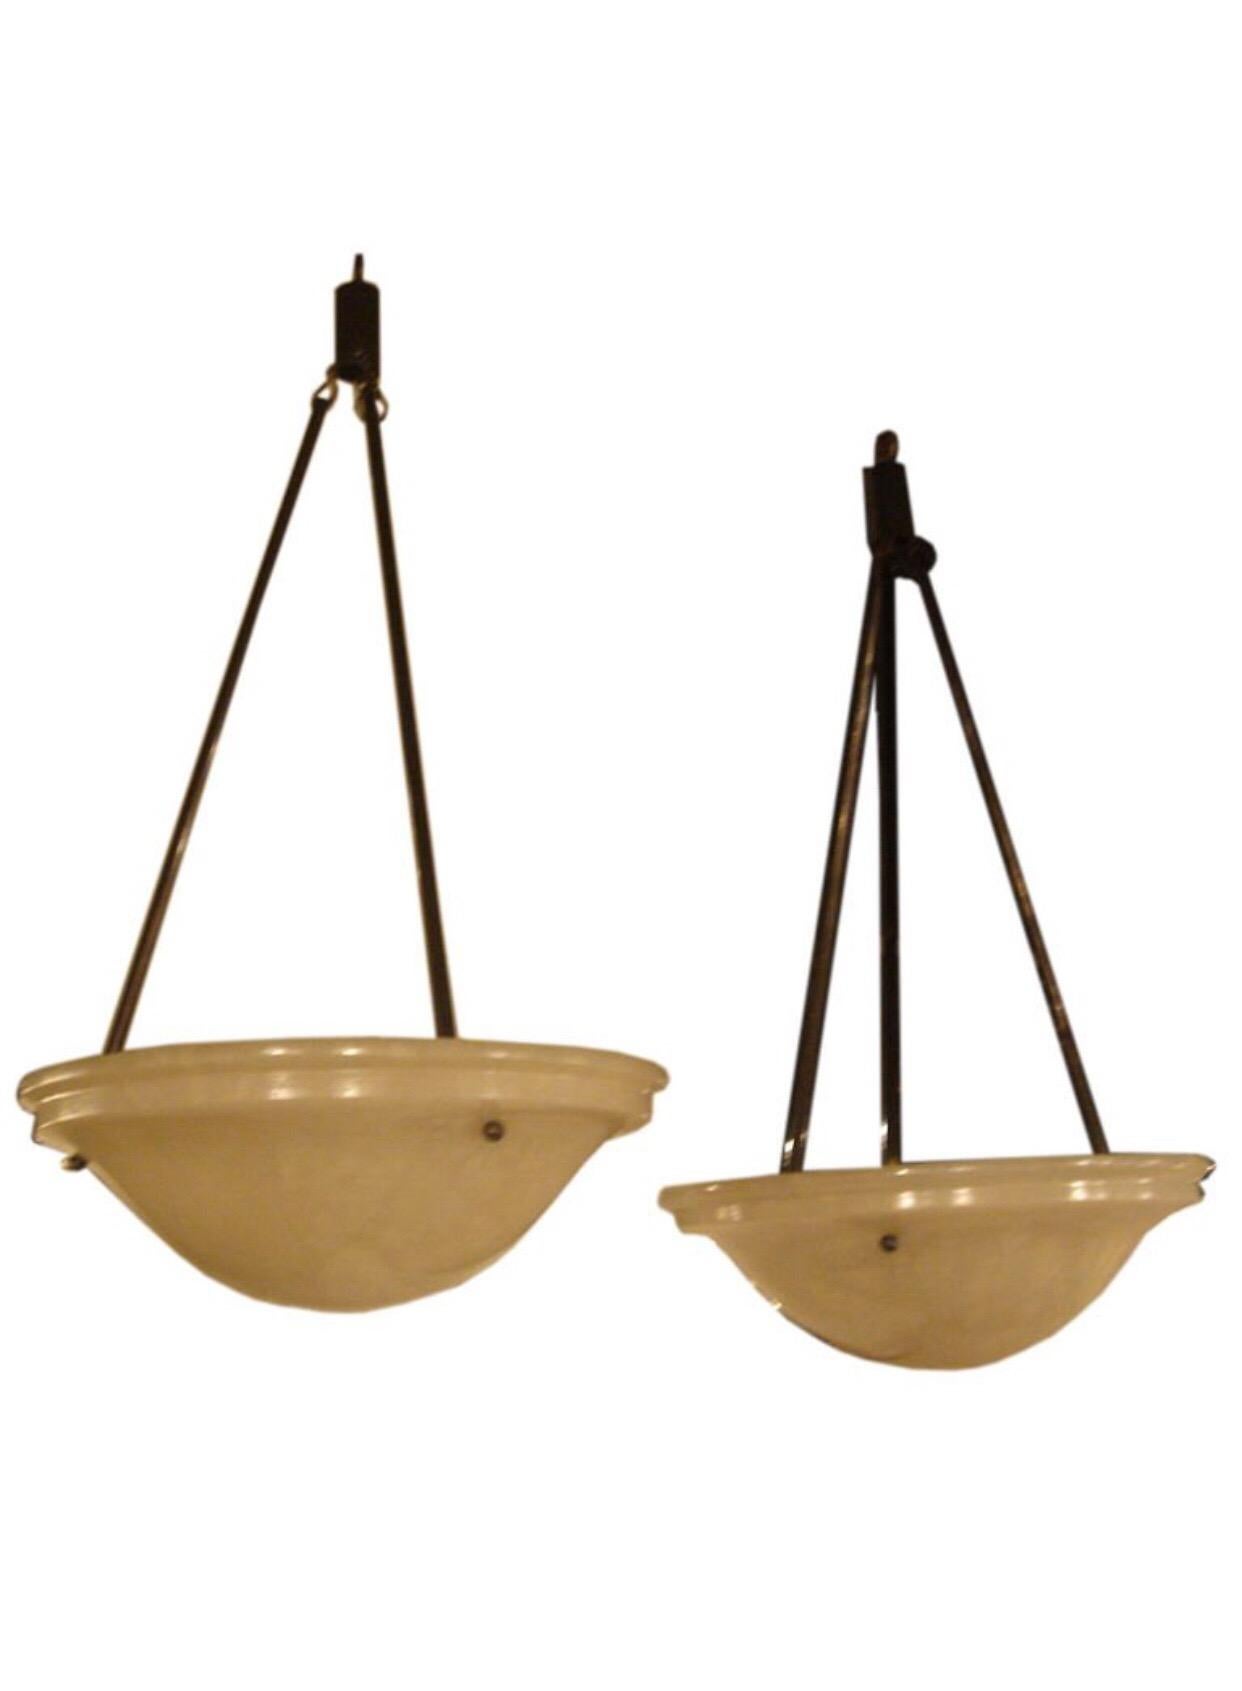 Art Deco French Alabaster Hanging Light Fixture, 2 Avail./Priced Individually